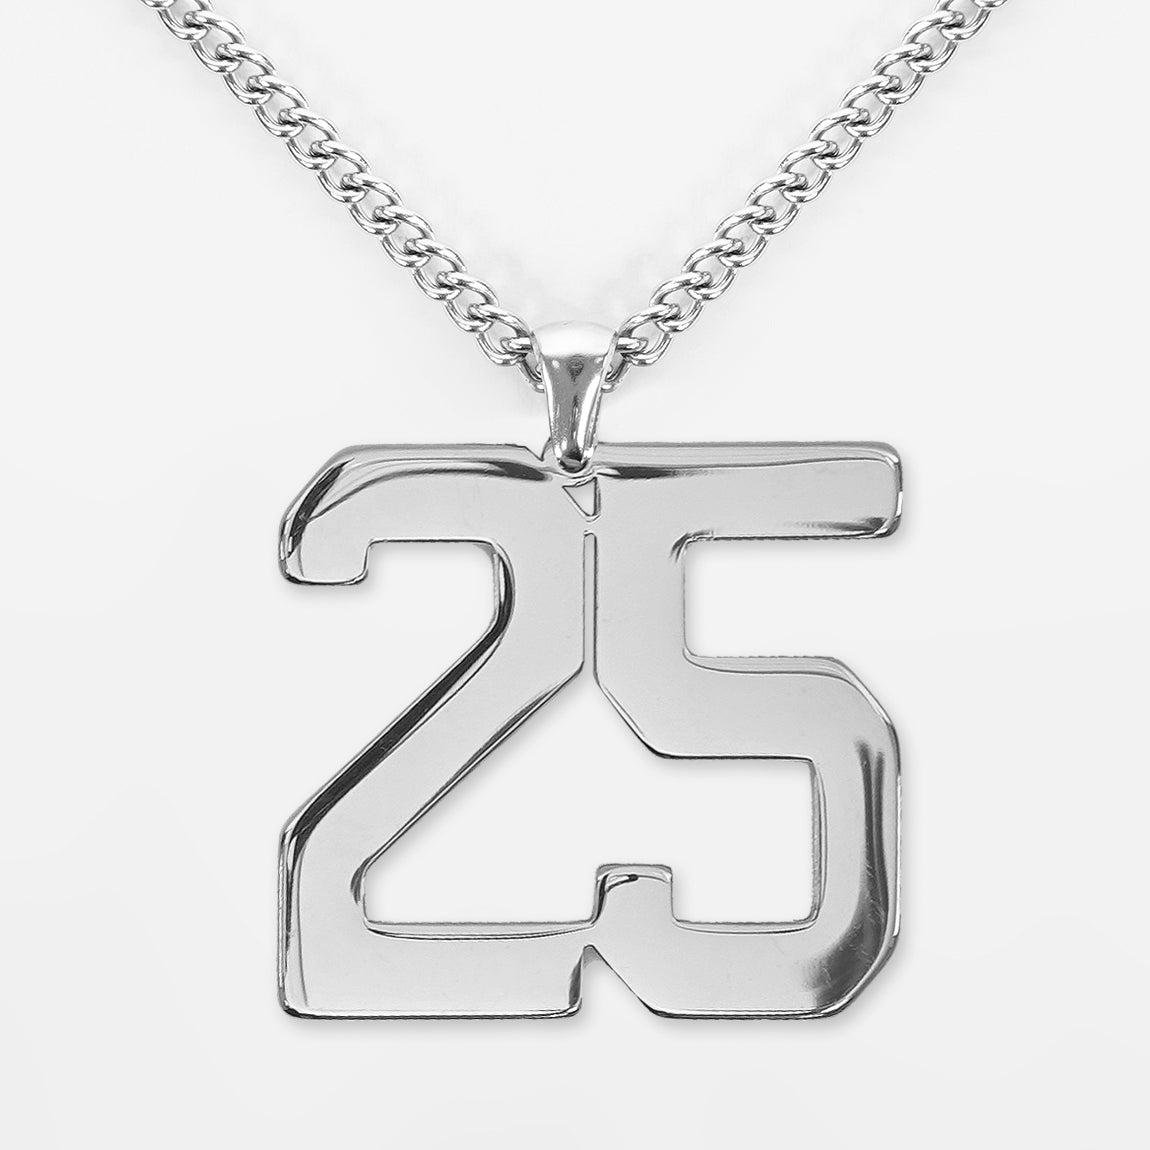 25 Number Pendant with Chain Necklace - Stainless Steel